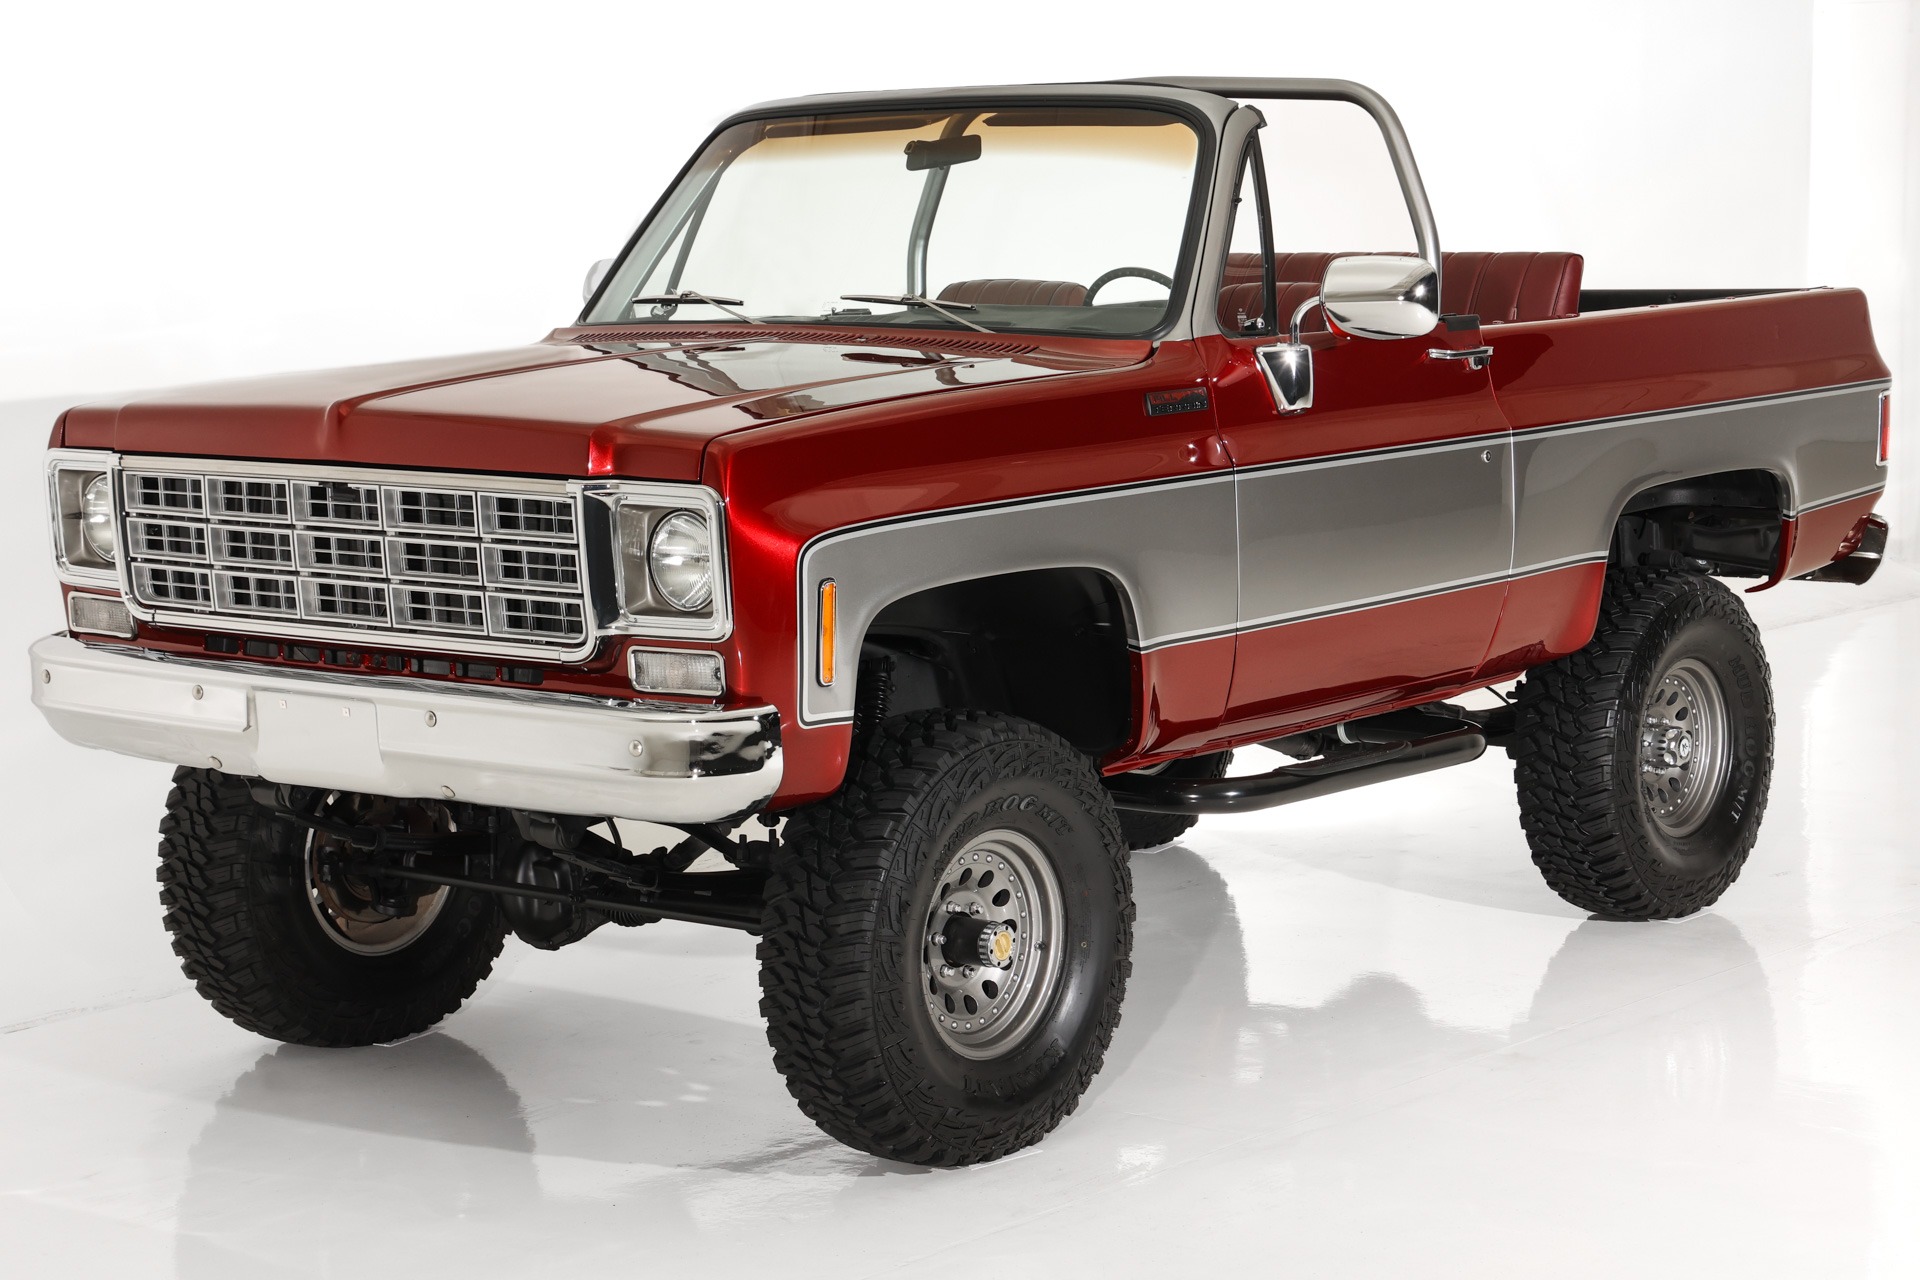 For Sale Used 1975 GMC Jimmy 4x4 350 4-Speed PS PB Fully Topless | American Dream Machines Des Moines IA 50309